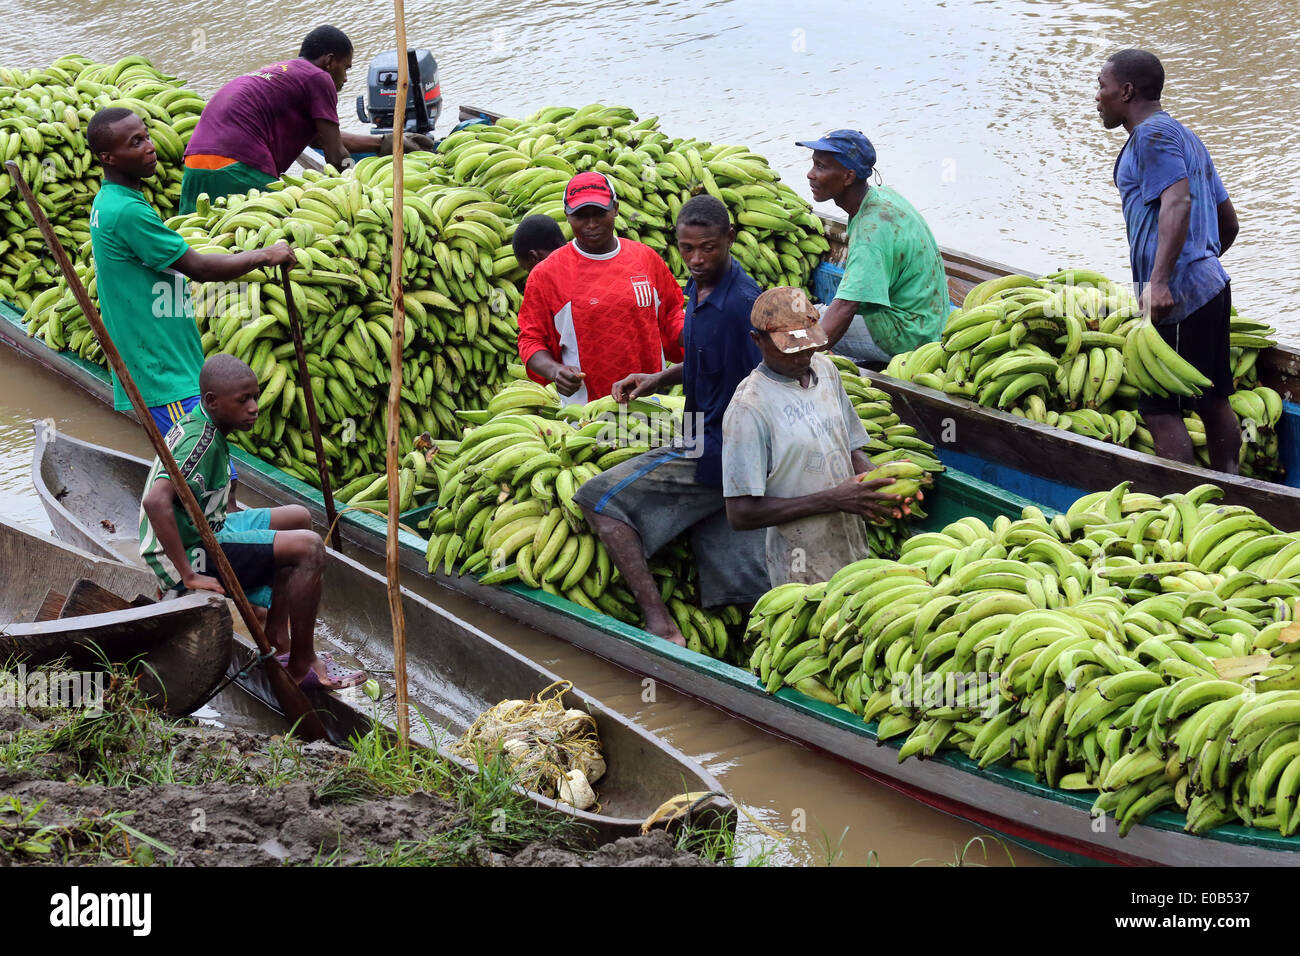 Bananas are loaded, boats on the river Rio Baudo, Choco province, Colombia Stock Photo